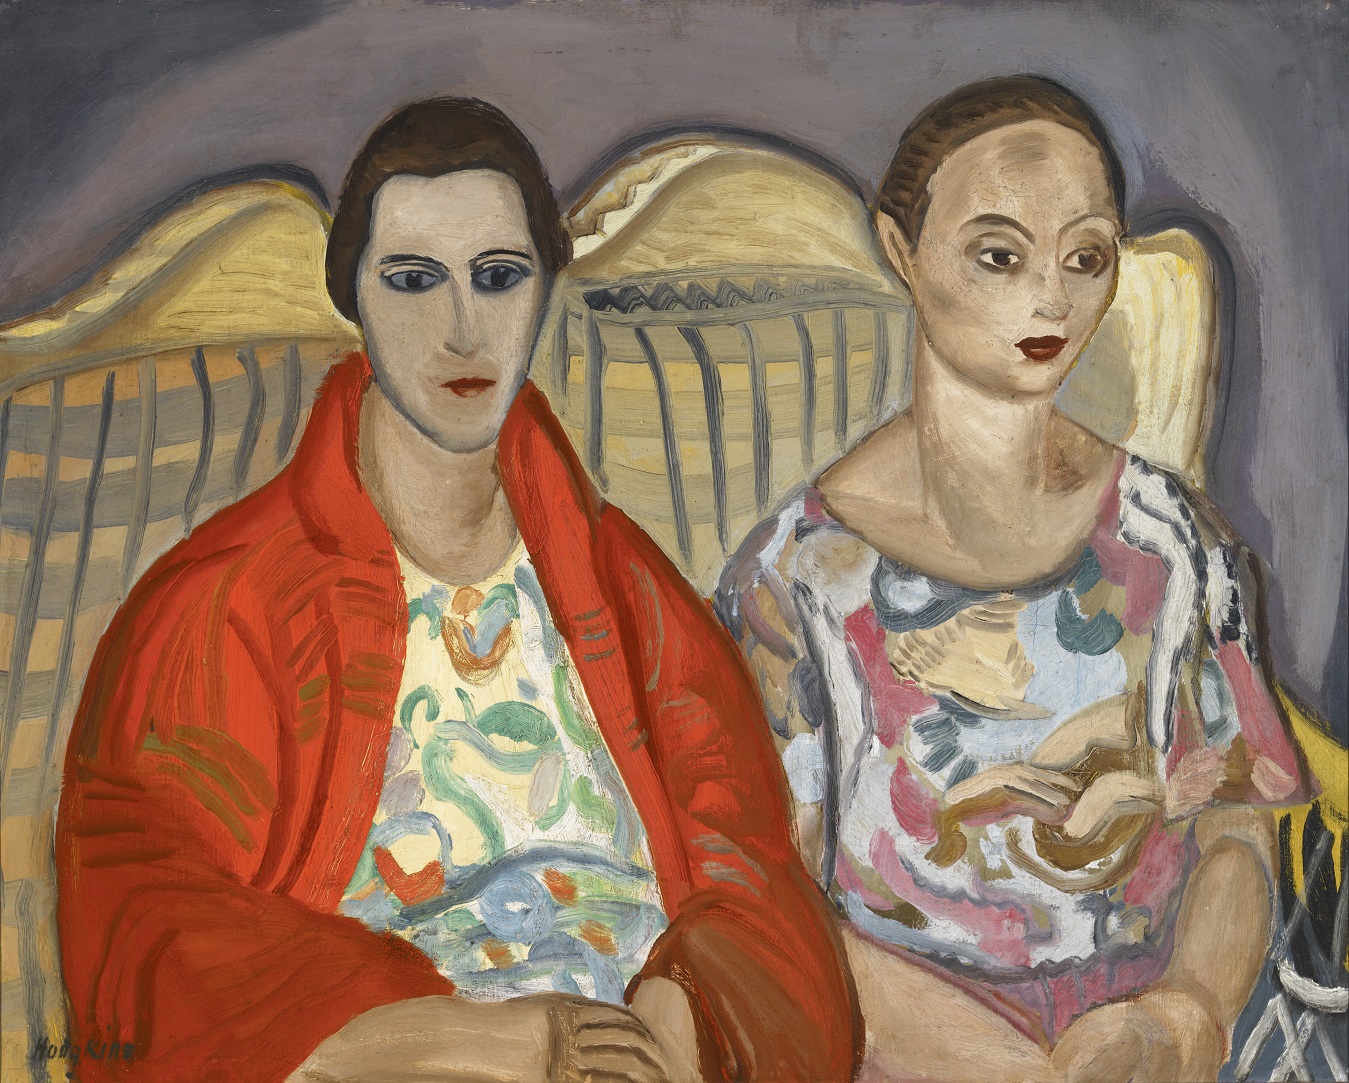 One of the works by Frances Hodgkins (1869-1947) Friends, Double Portrait, 1922-1925, from the...